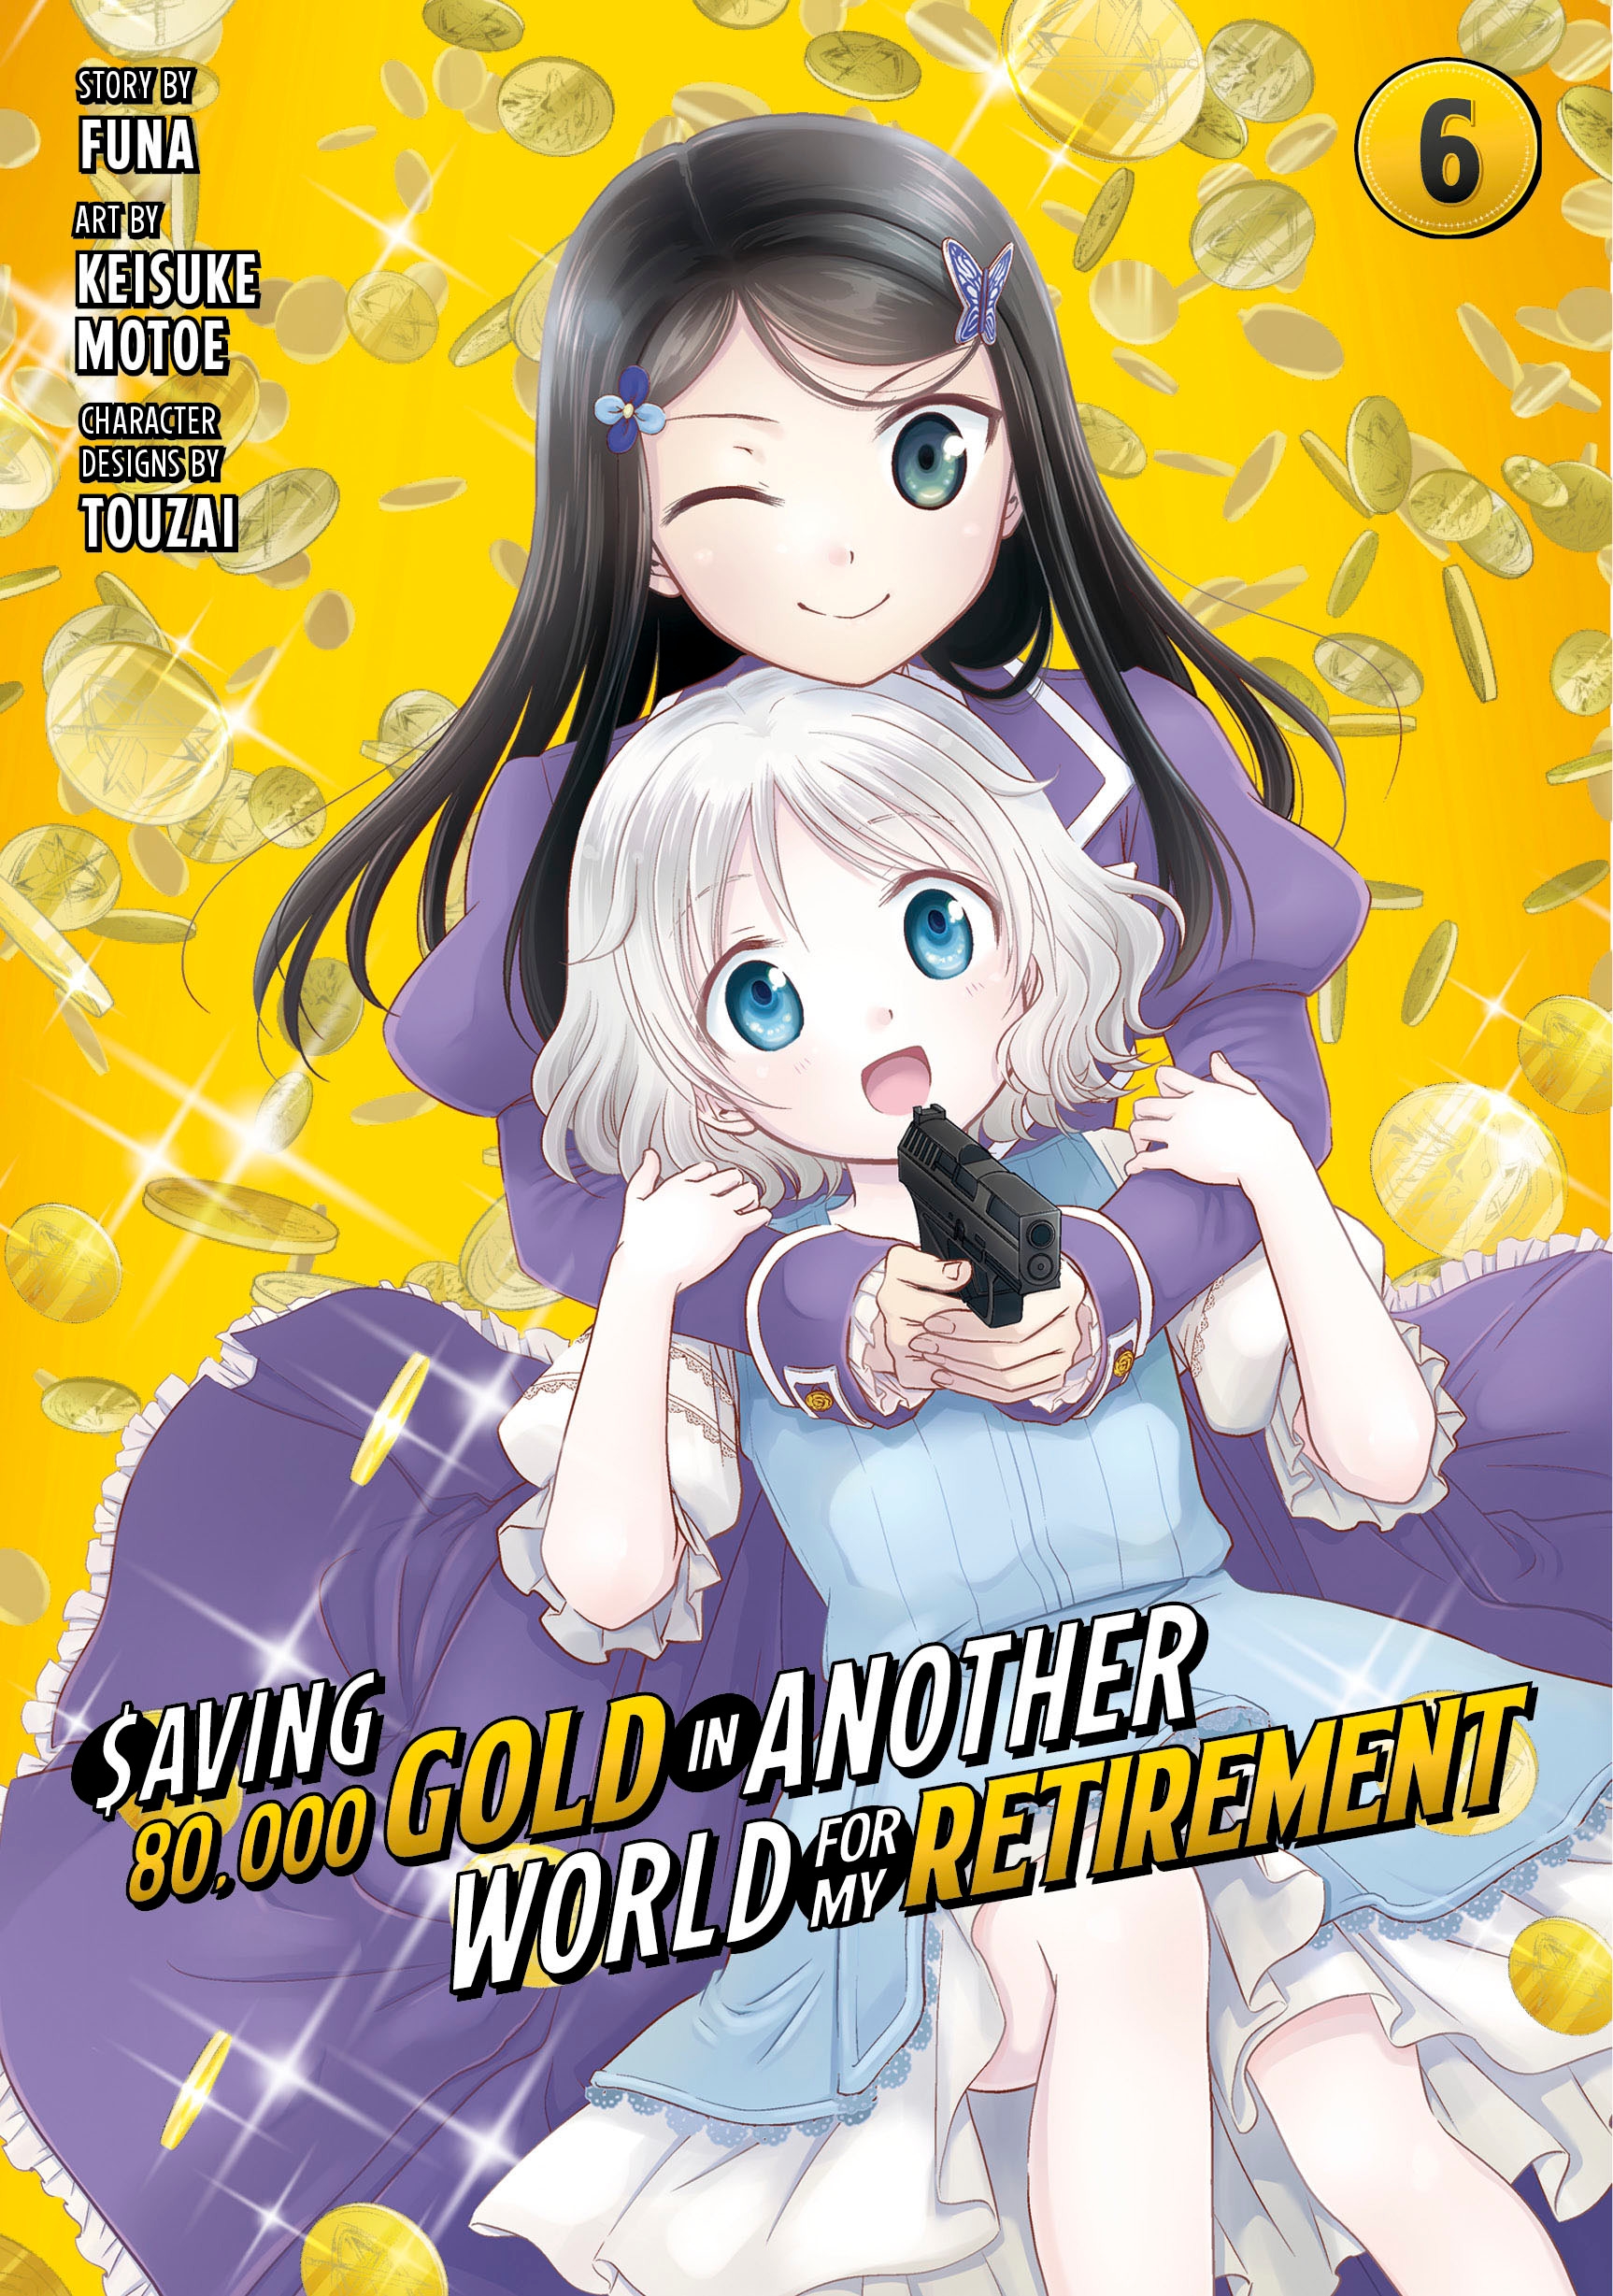 Saving 80,000 Gold in Another World for My Retirement 6 (Manga) by 